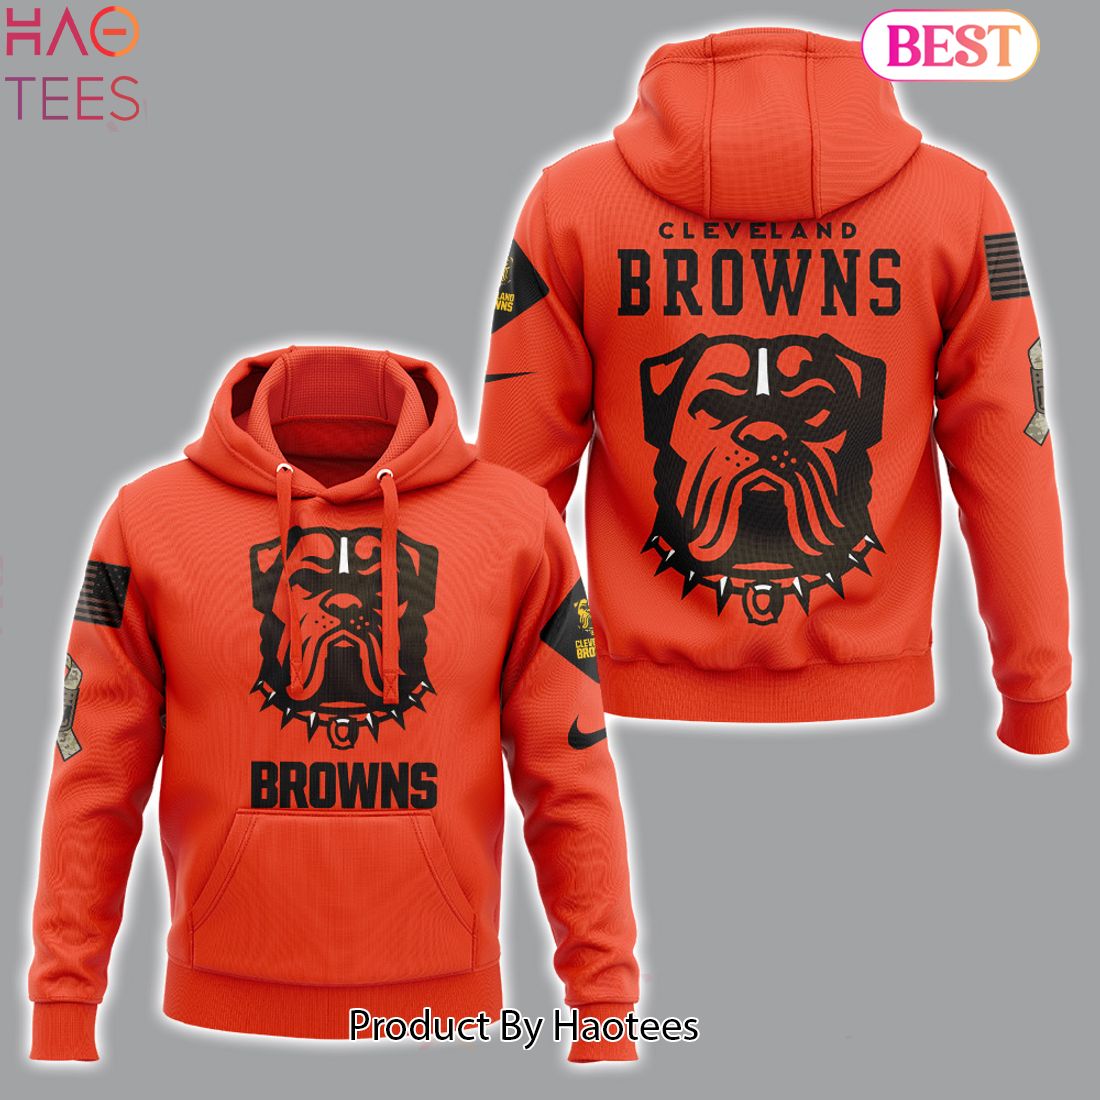 NEW Cleveland Browns NFL Salute To Service New Logo Hoodie